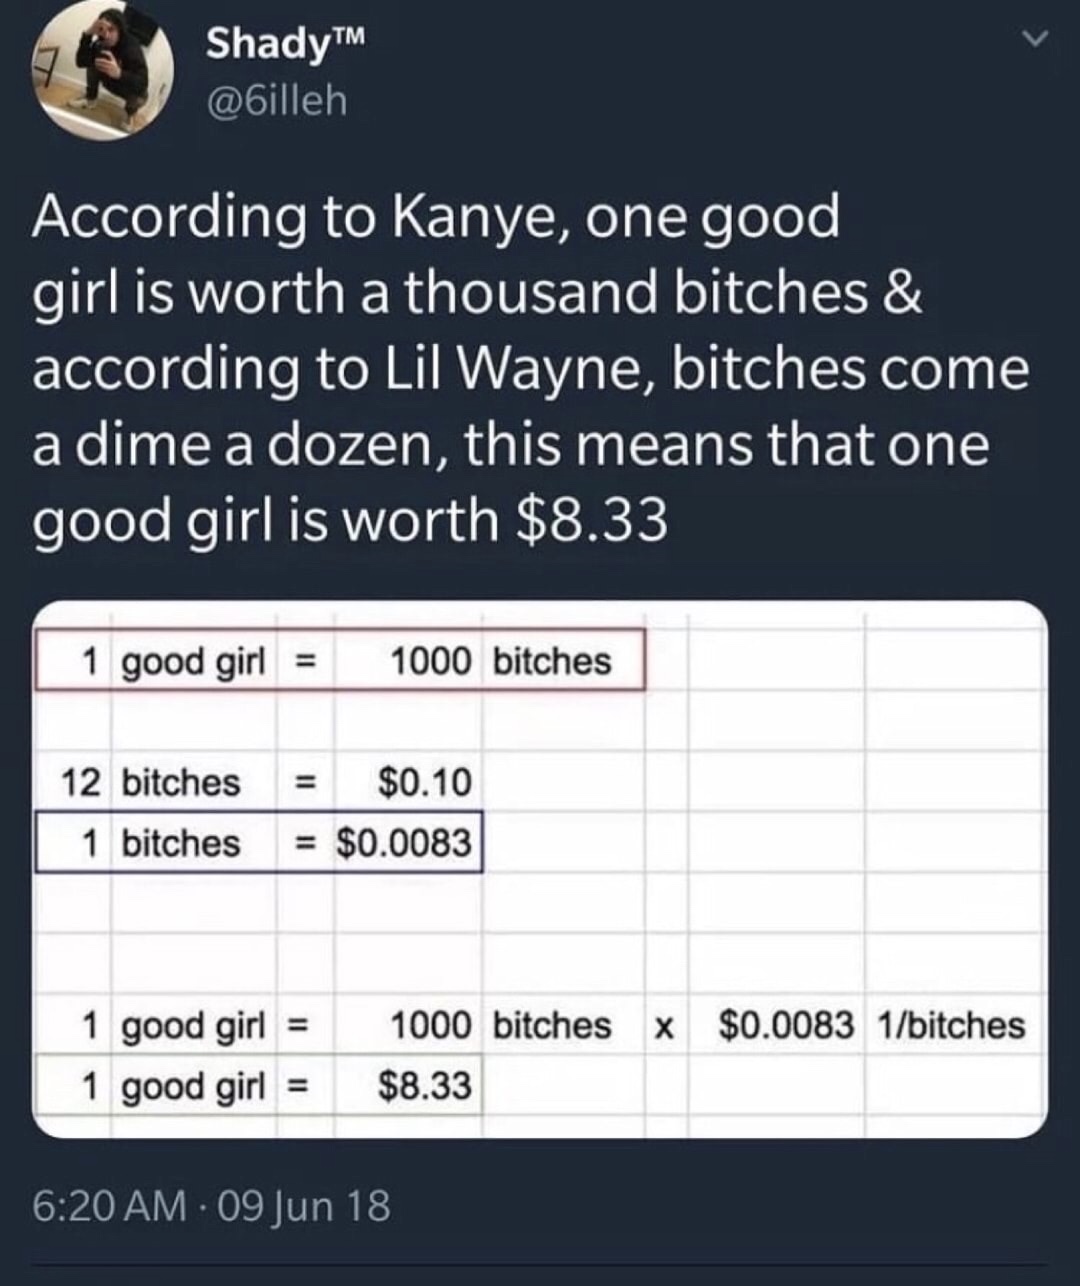 dank memes - software - ShadyTM According to Kanye, one good girl is worth a thousand bitches & according to Lil Wayne, bitches come a dime a dozen, this means that one good girl is worth $8.33 1 good girl 1000 bitches 12 bitches 1 bitches $0.10 $0.0083 x